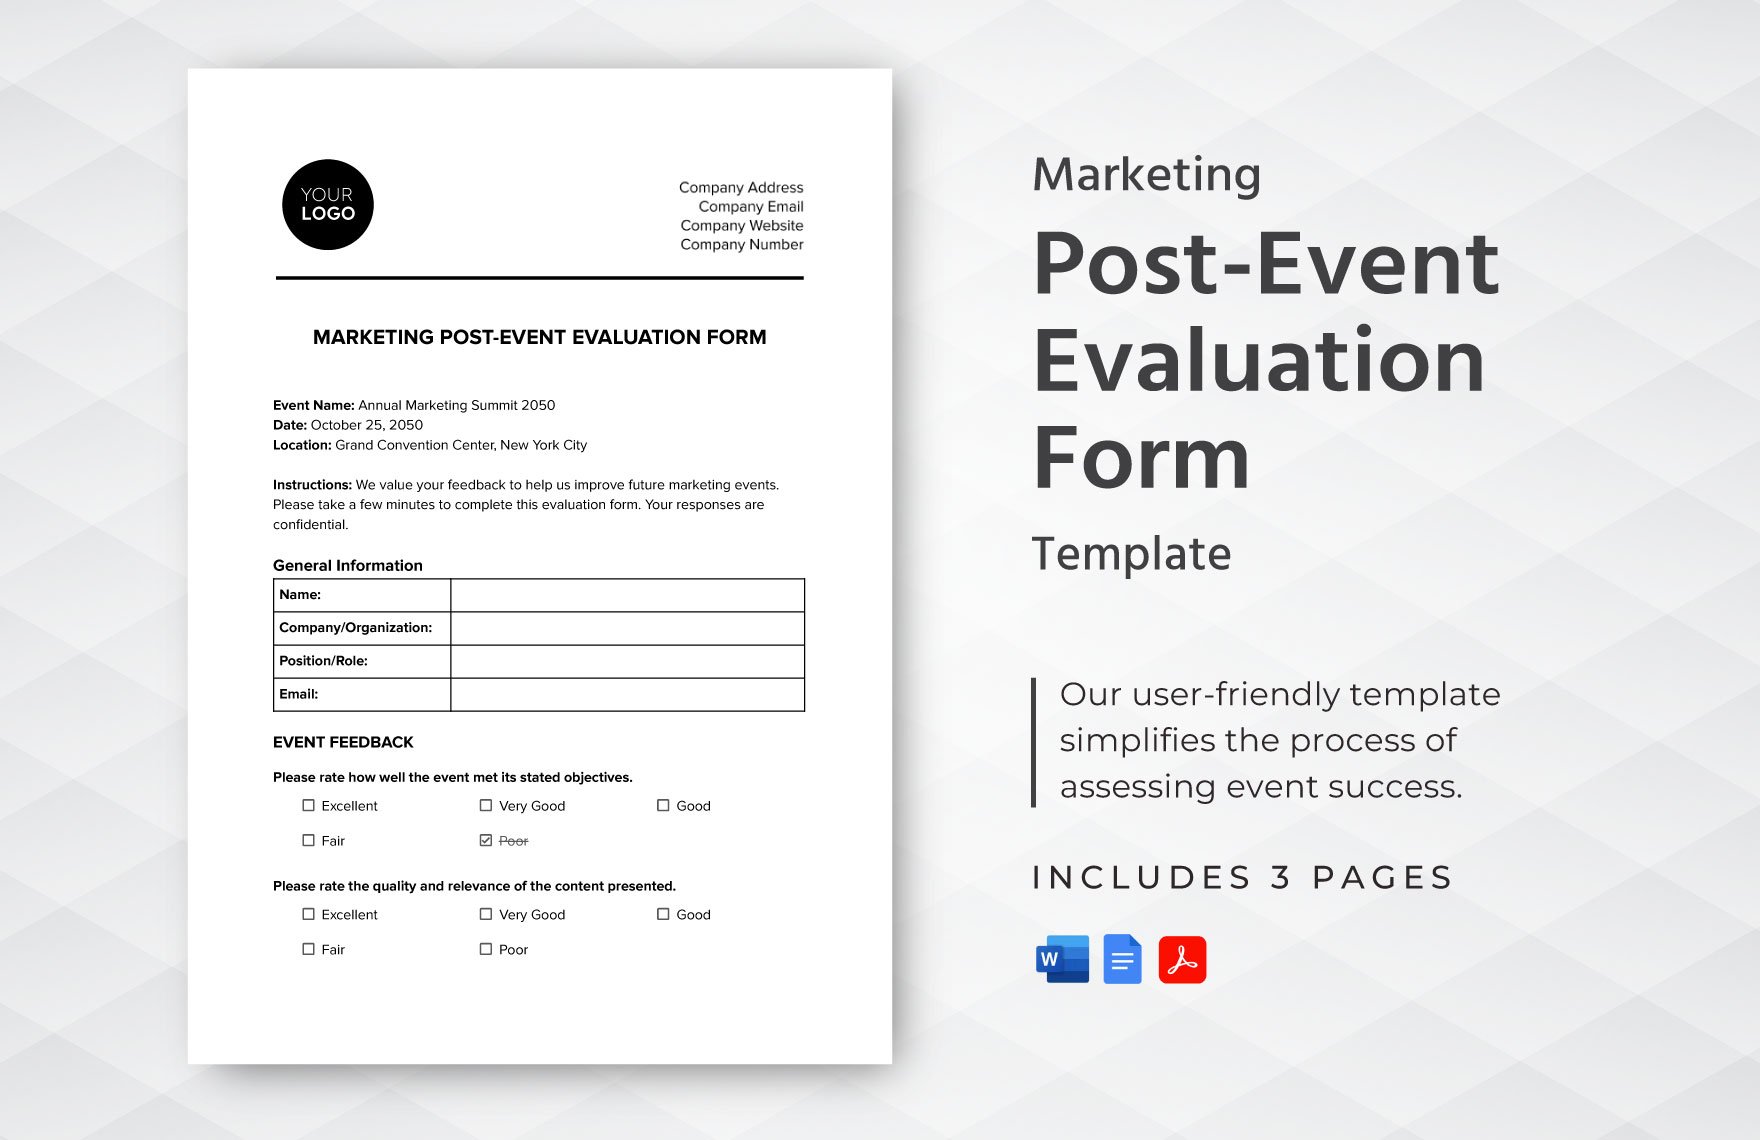 Marketing Post-Event Evaluation Form Template in Word, Google Docs, PDF